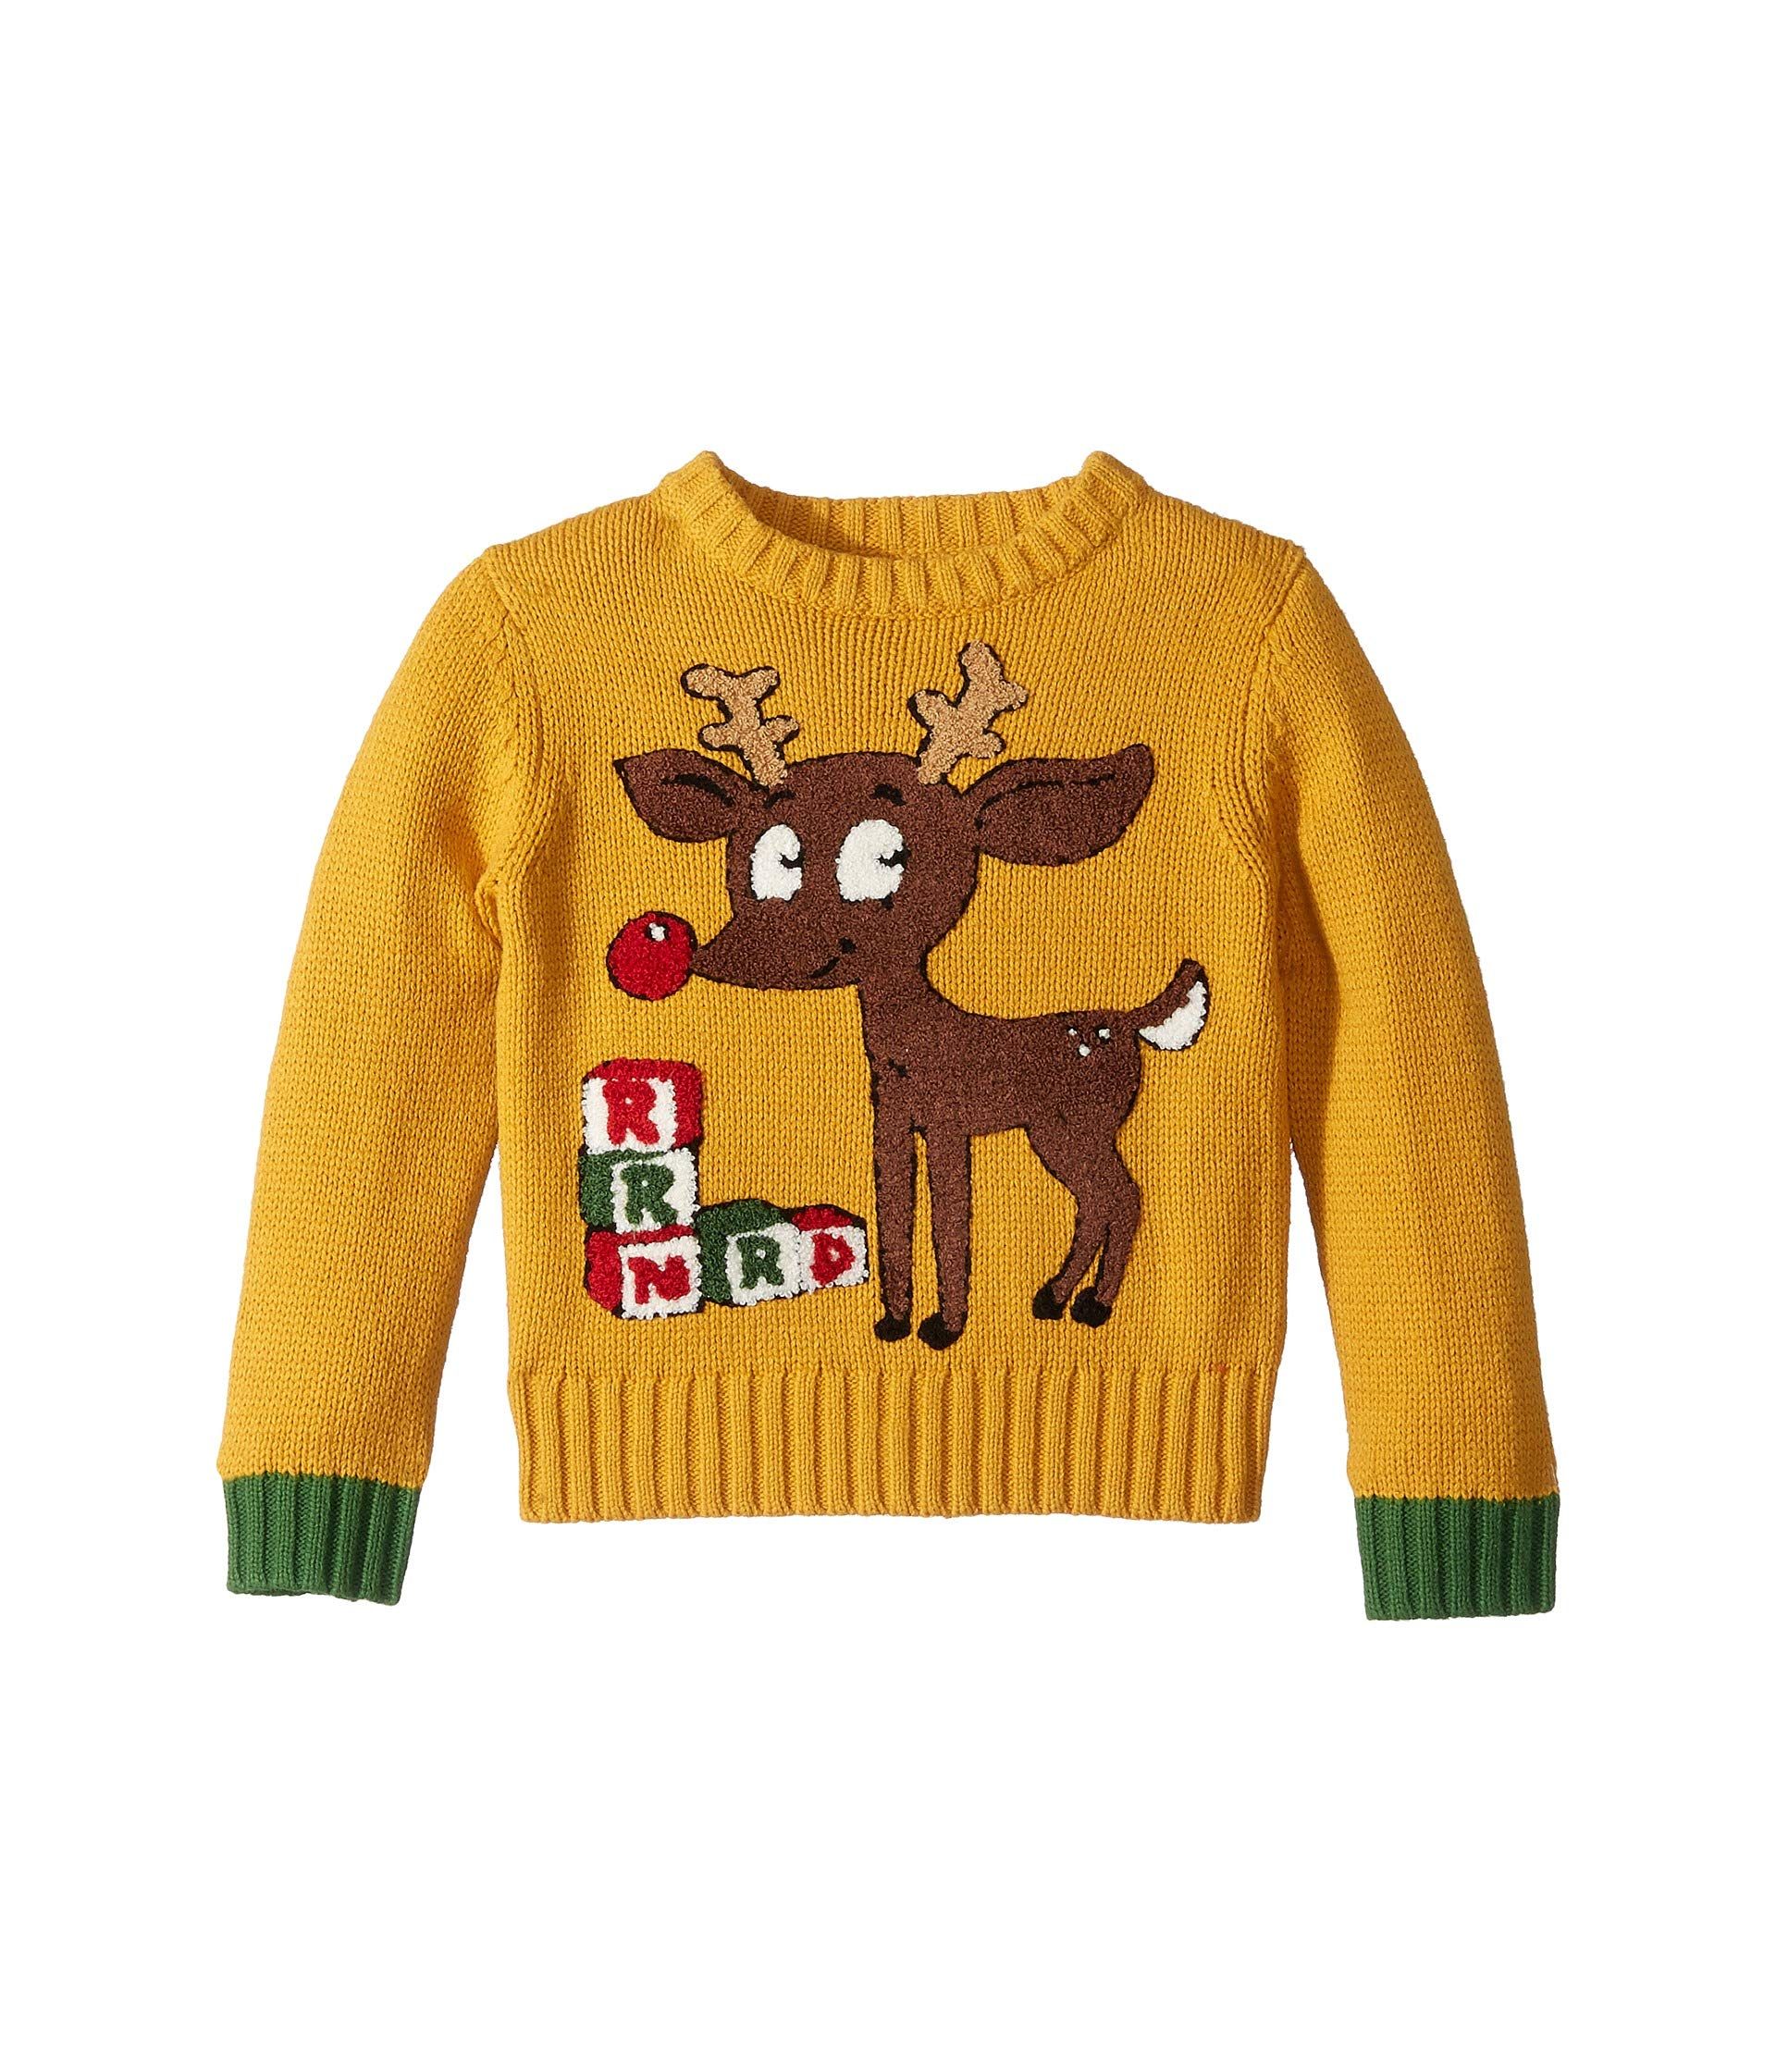 Whoopi Baby Reindeer Sweater (Infant/Toddler)